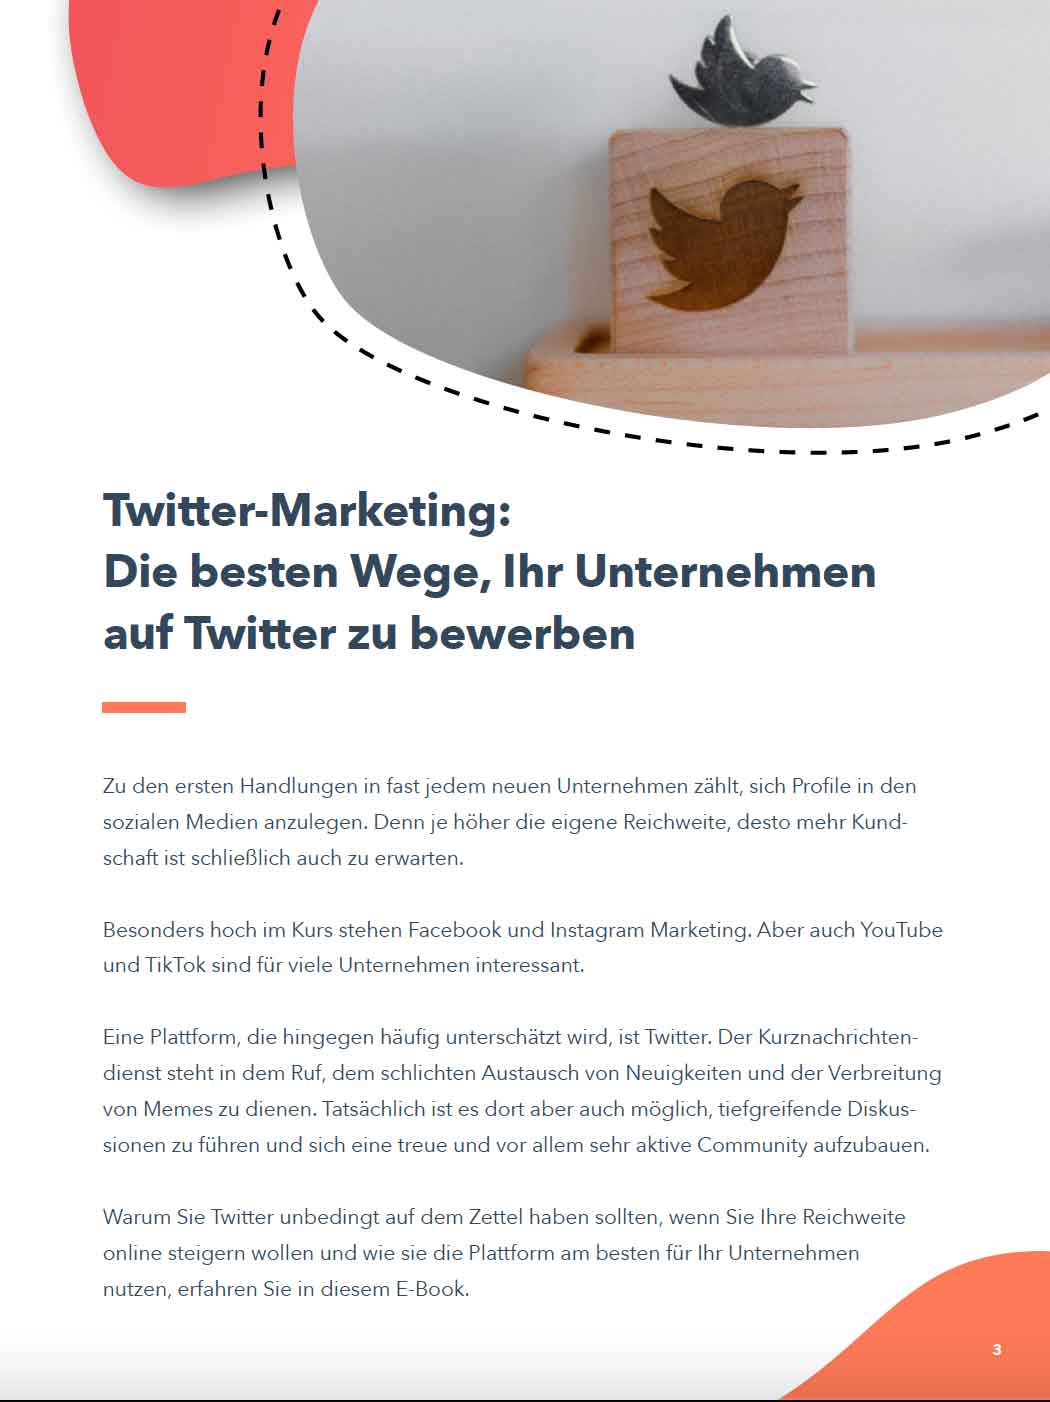 Twitter-Marketing-Preview-2